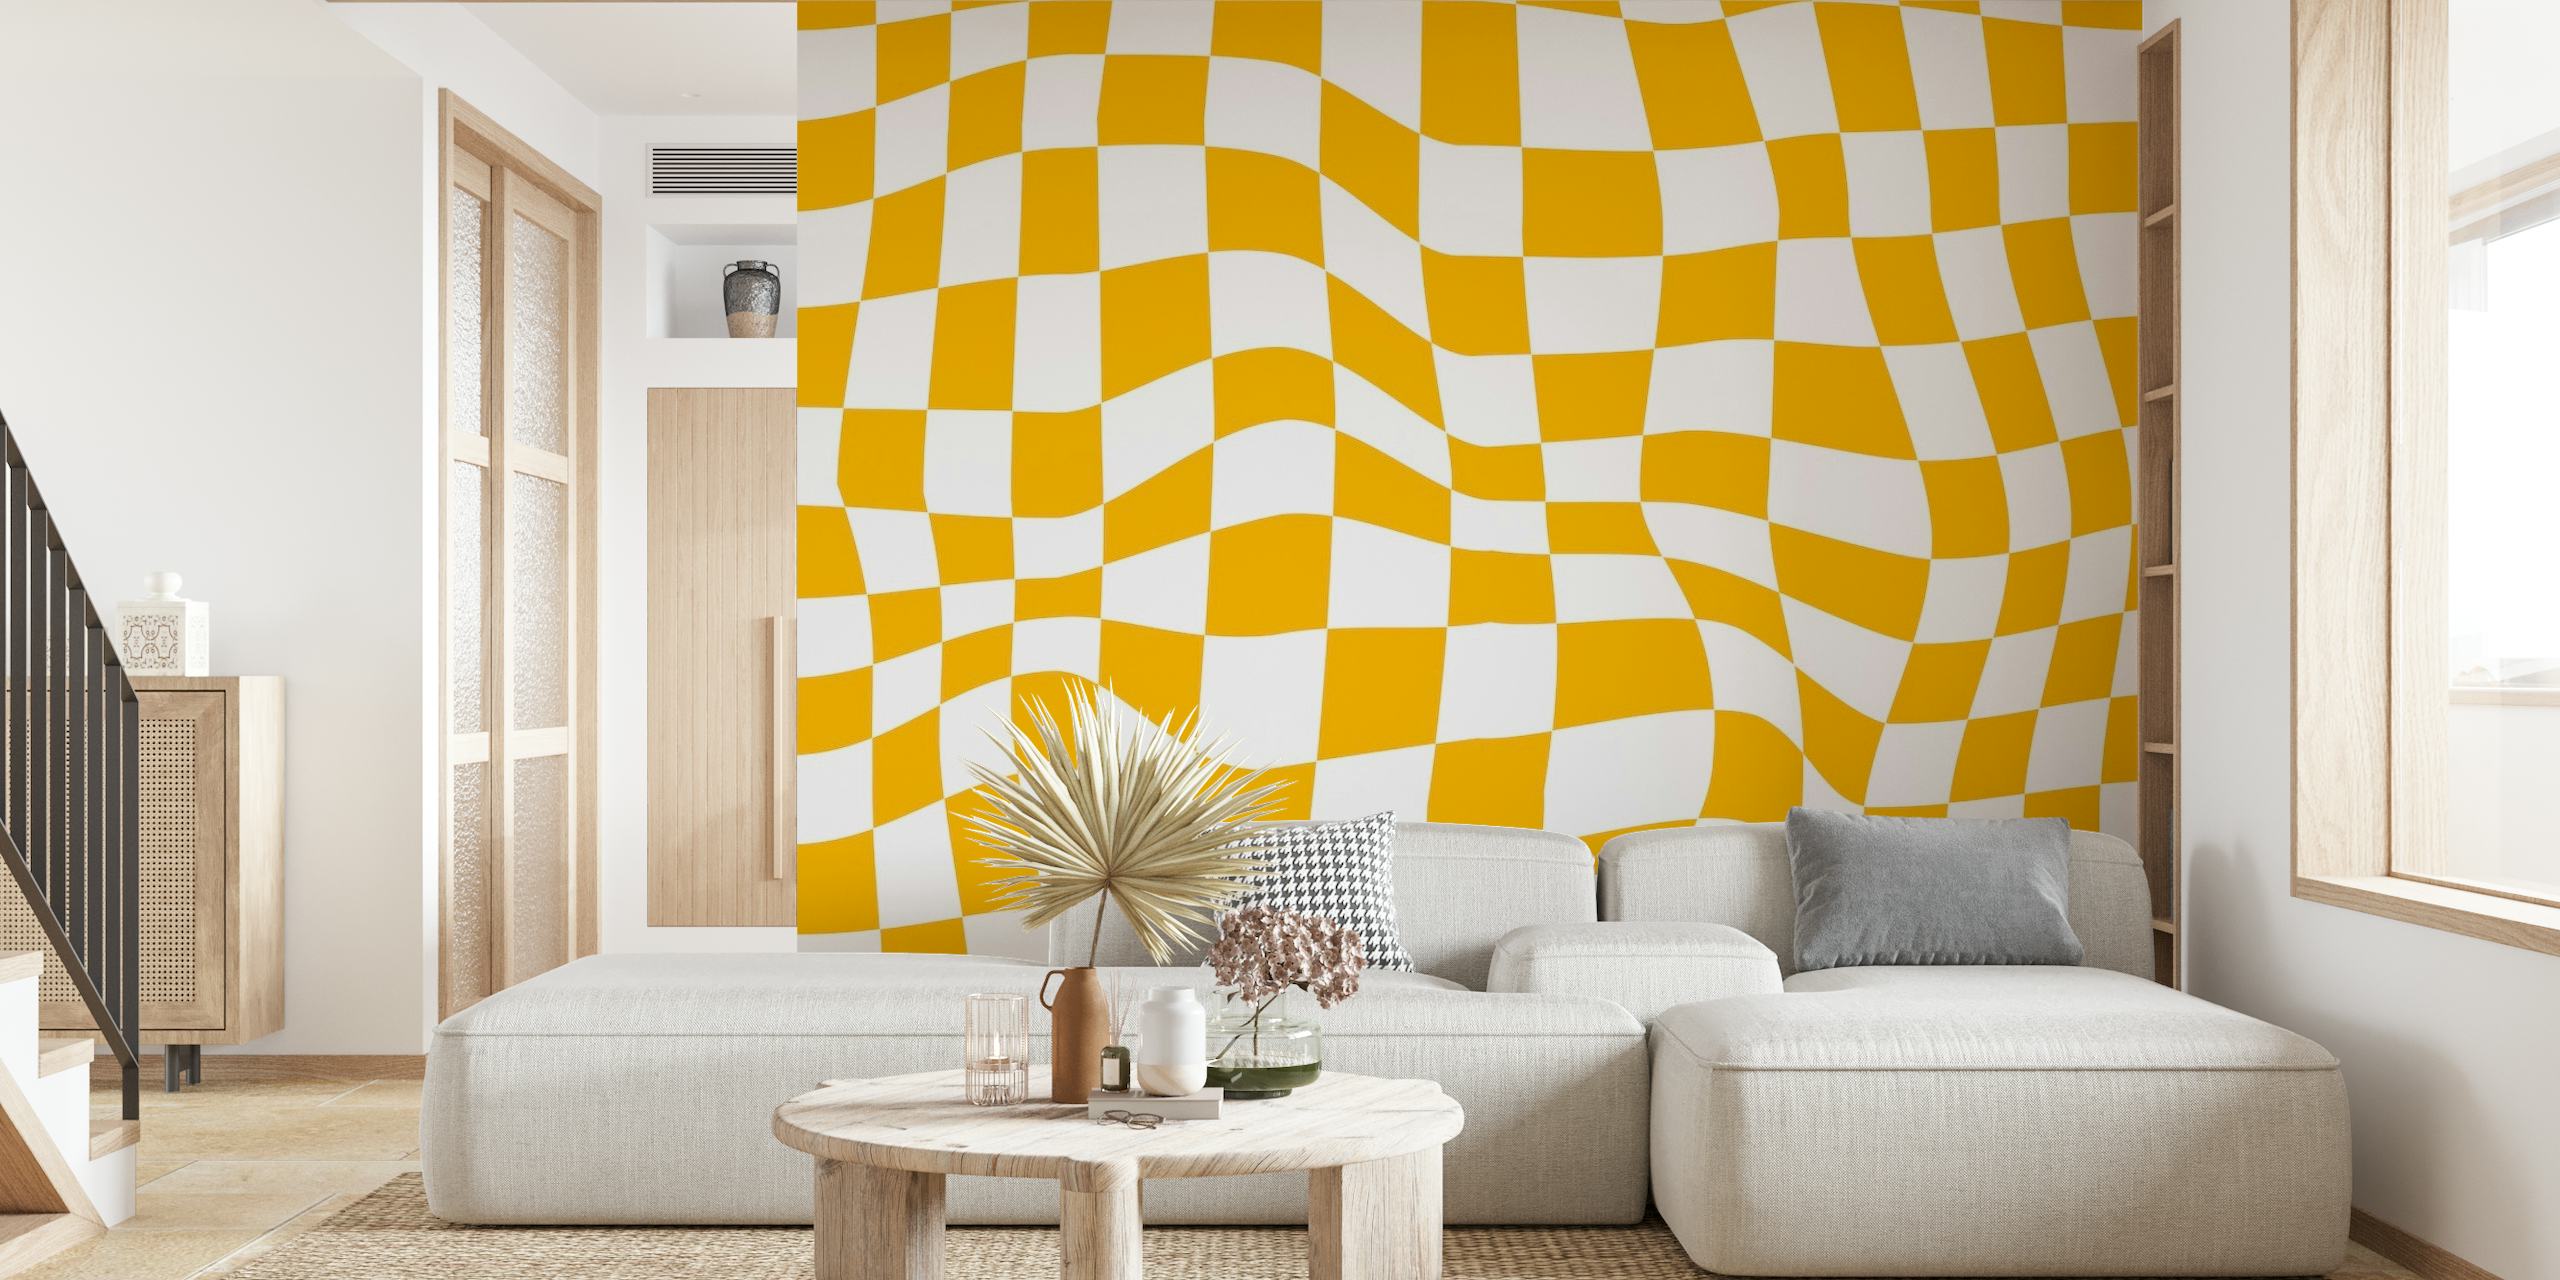 Yellow and white retro checkered pattern wall mural evoking 60s and 70s style vibes